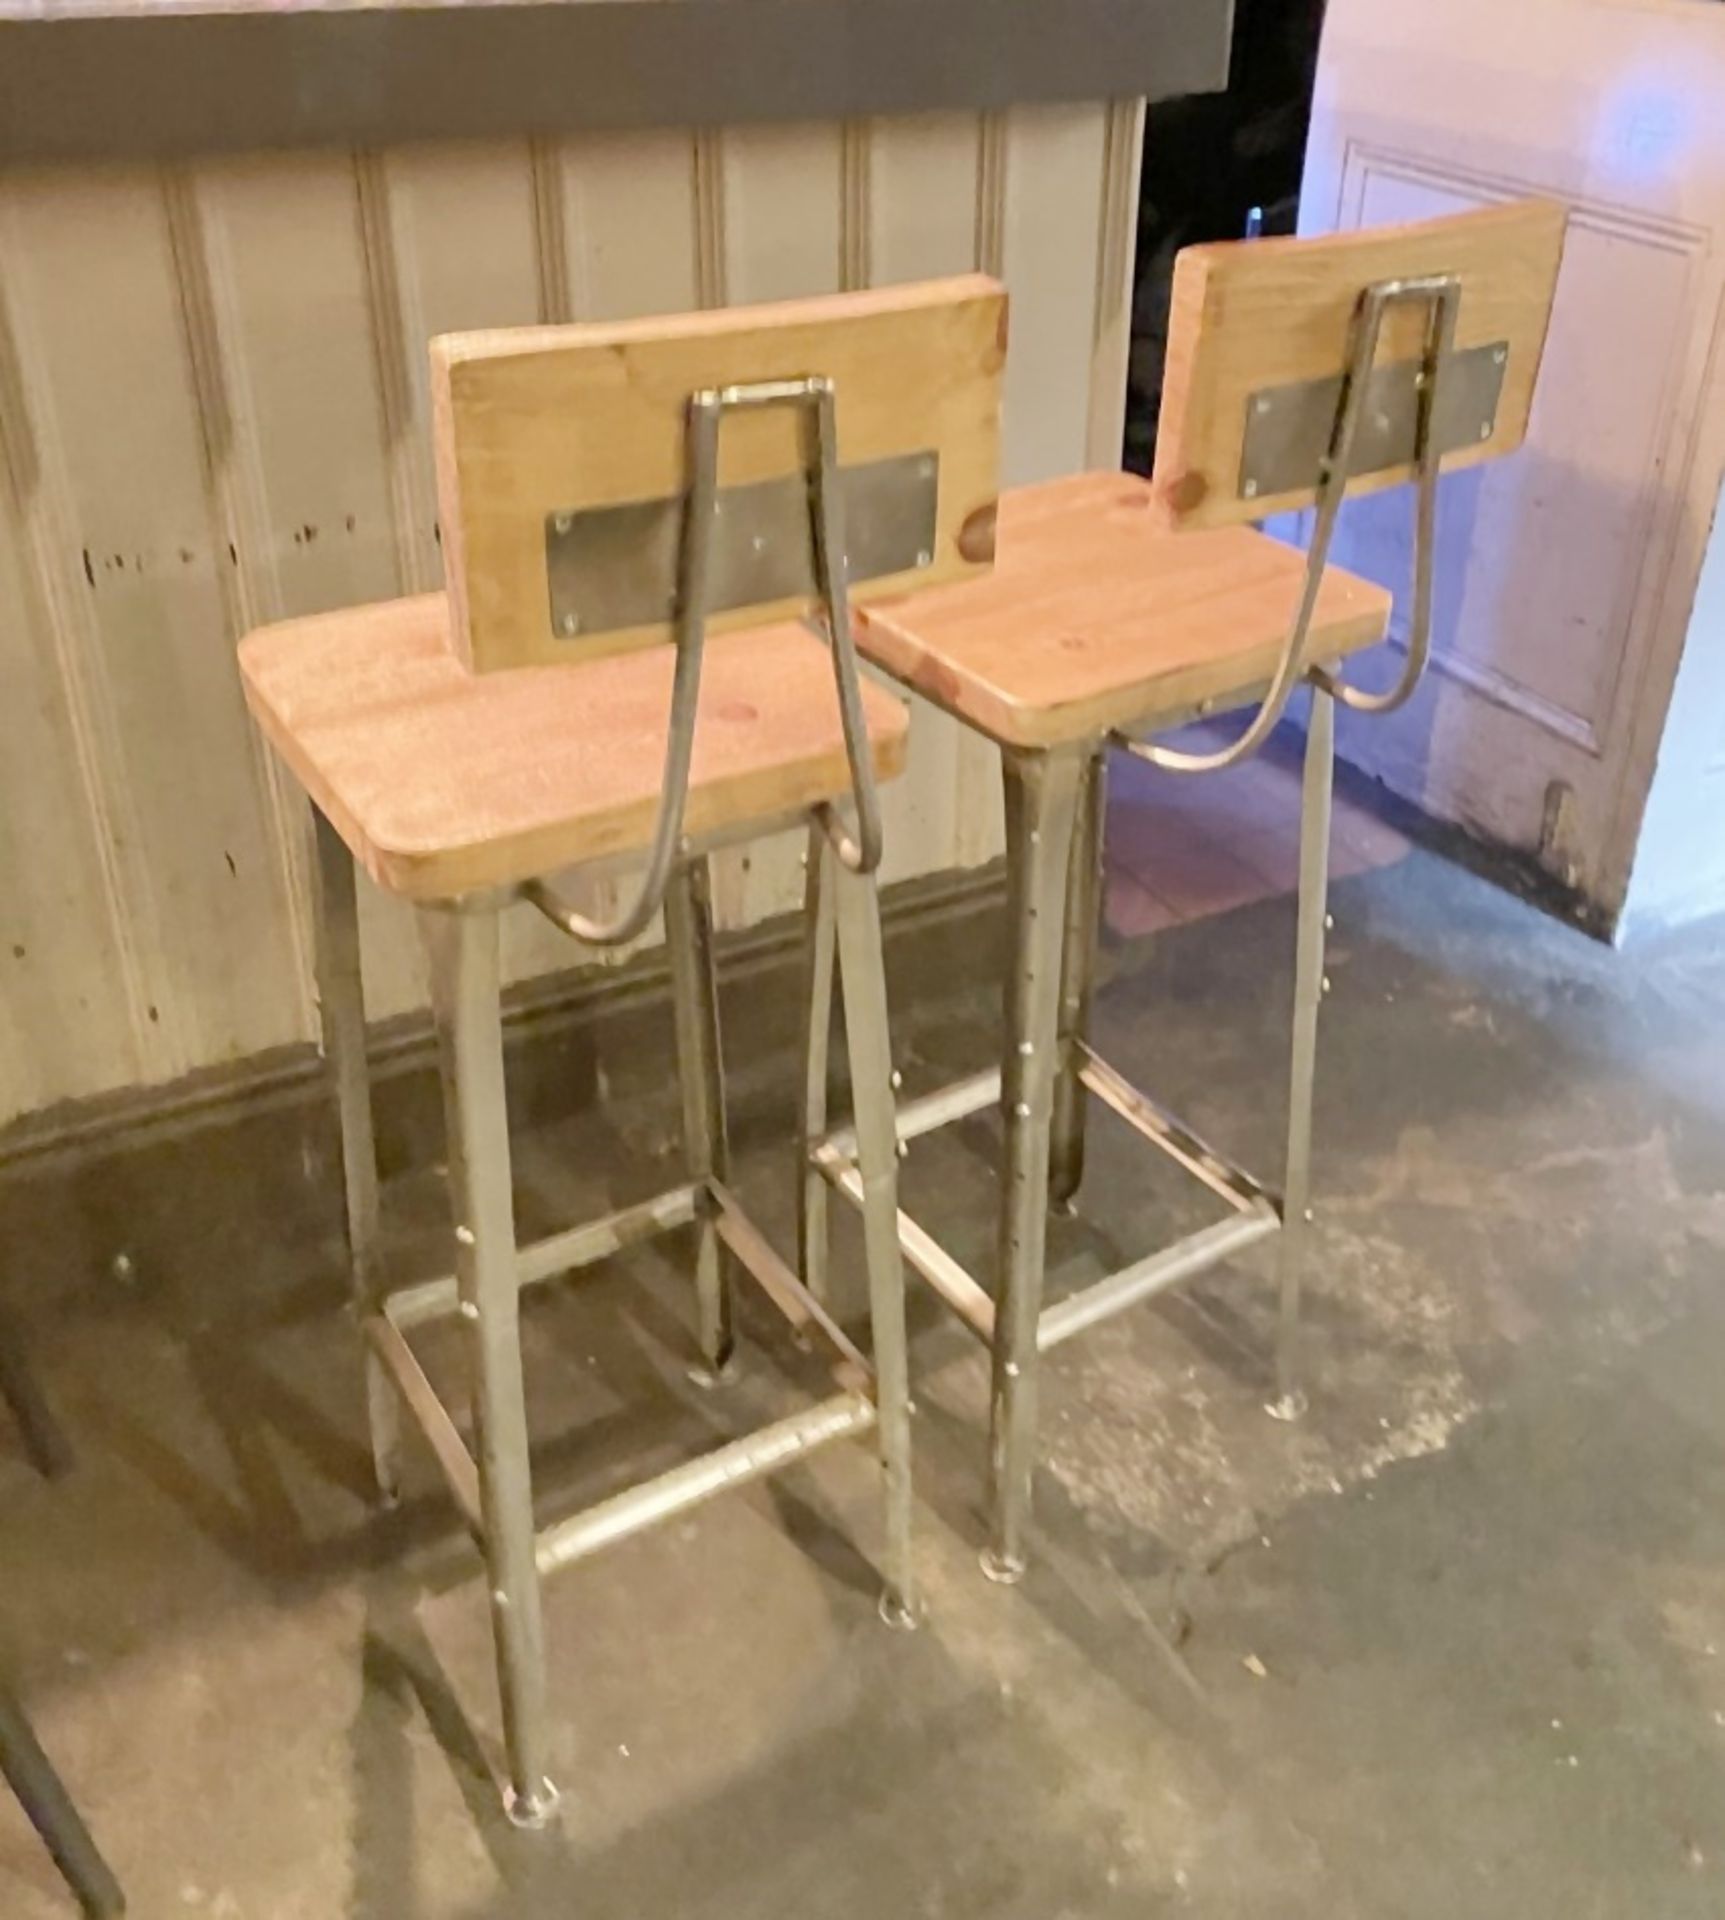 Pair of Industrial-style Bar Stools with Solid Wood Seats and Scooped Backrests - Image 2 of 4